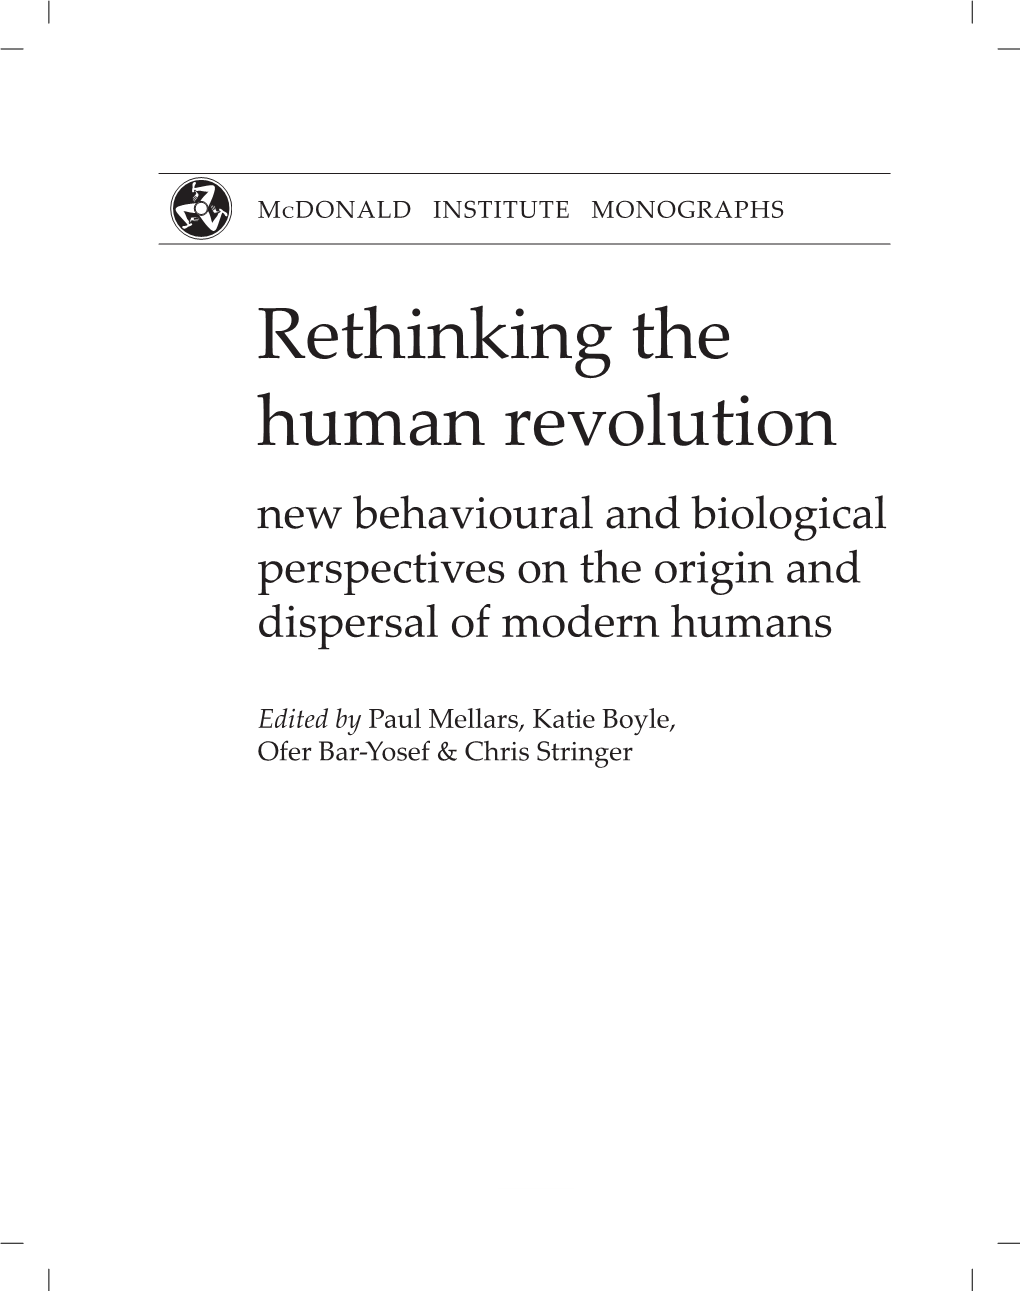 Rethinking the Human Revolution New Behavioural and Biological Perspectives on the Origin and Dispersal of Modern Humans